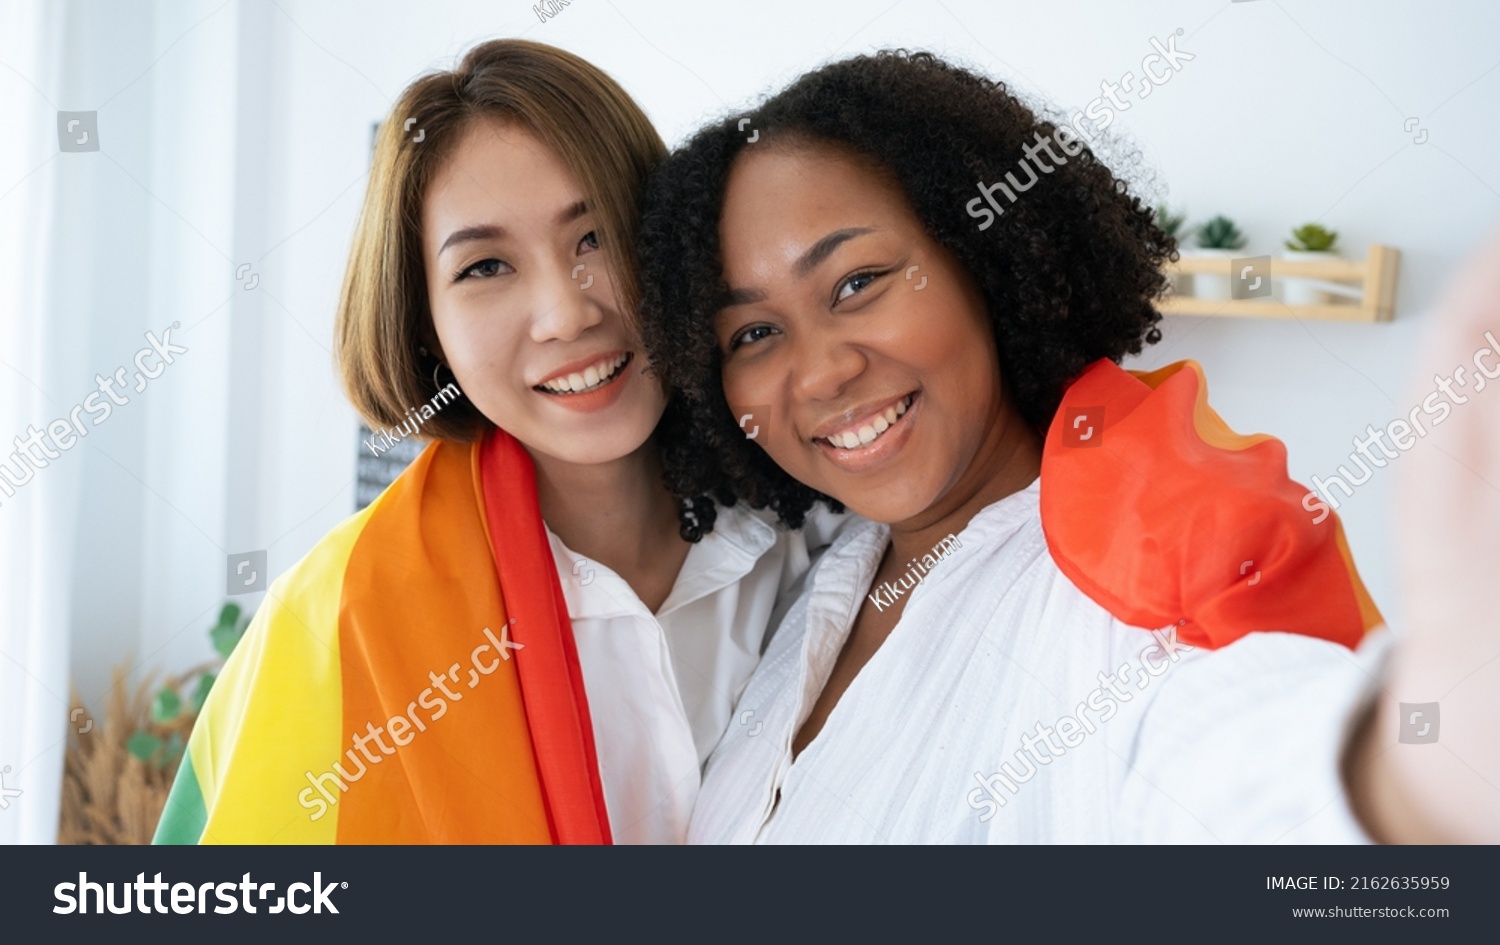 Diversity African American and Asian Married couples Lesbian LGBTQ. Married homosexual show Diamond ring.Sexual equality,LGBT Pride month,Parade celebrations concept.Family of happiness smiling. #2162635959